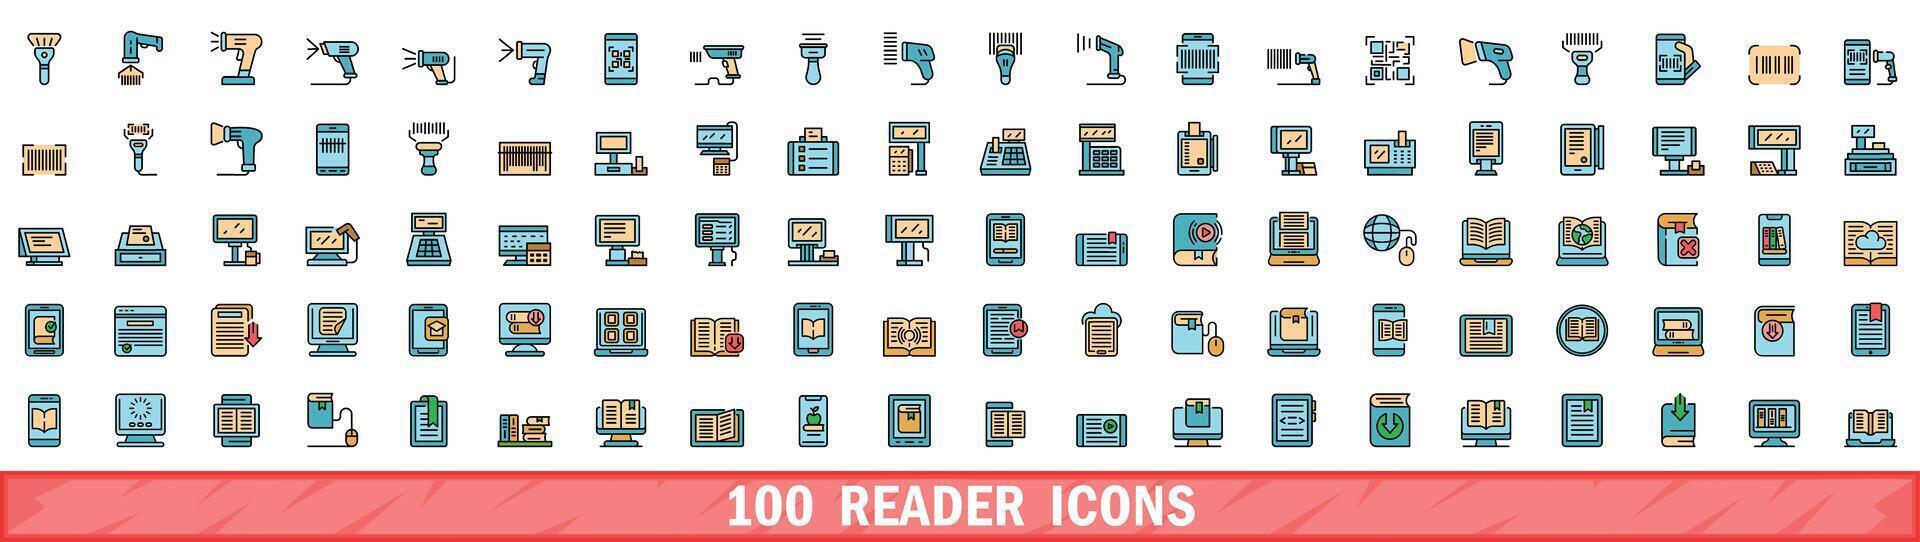 100 reader icons set, color line style vector